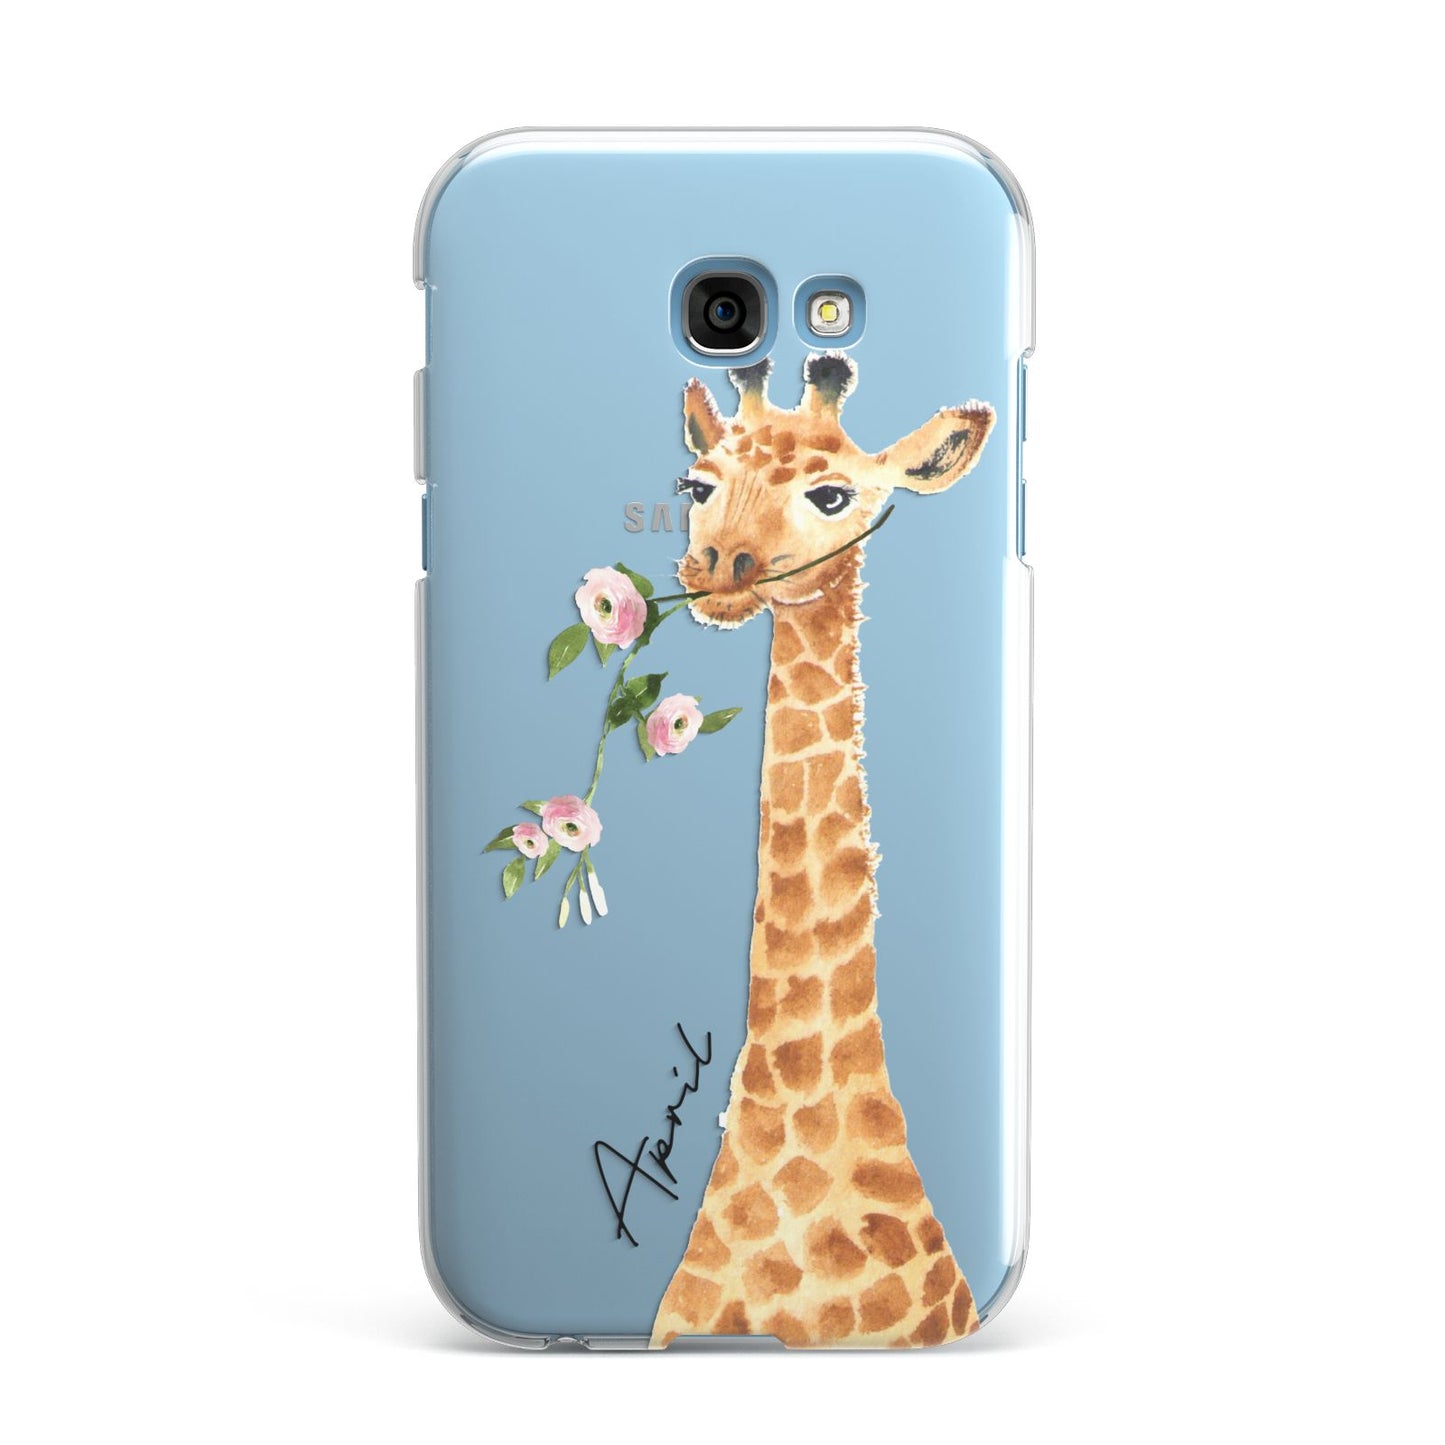 Personalised Giraffe with Name Samsung Galaxy A7 2017 Case